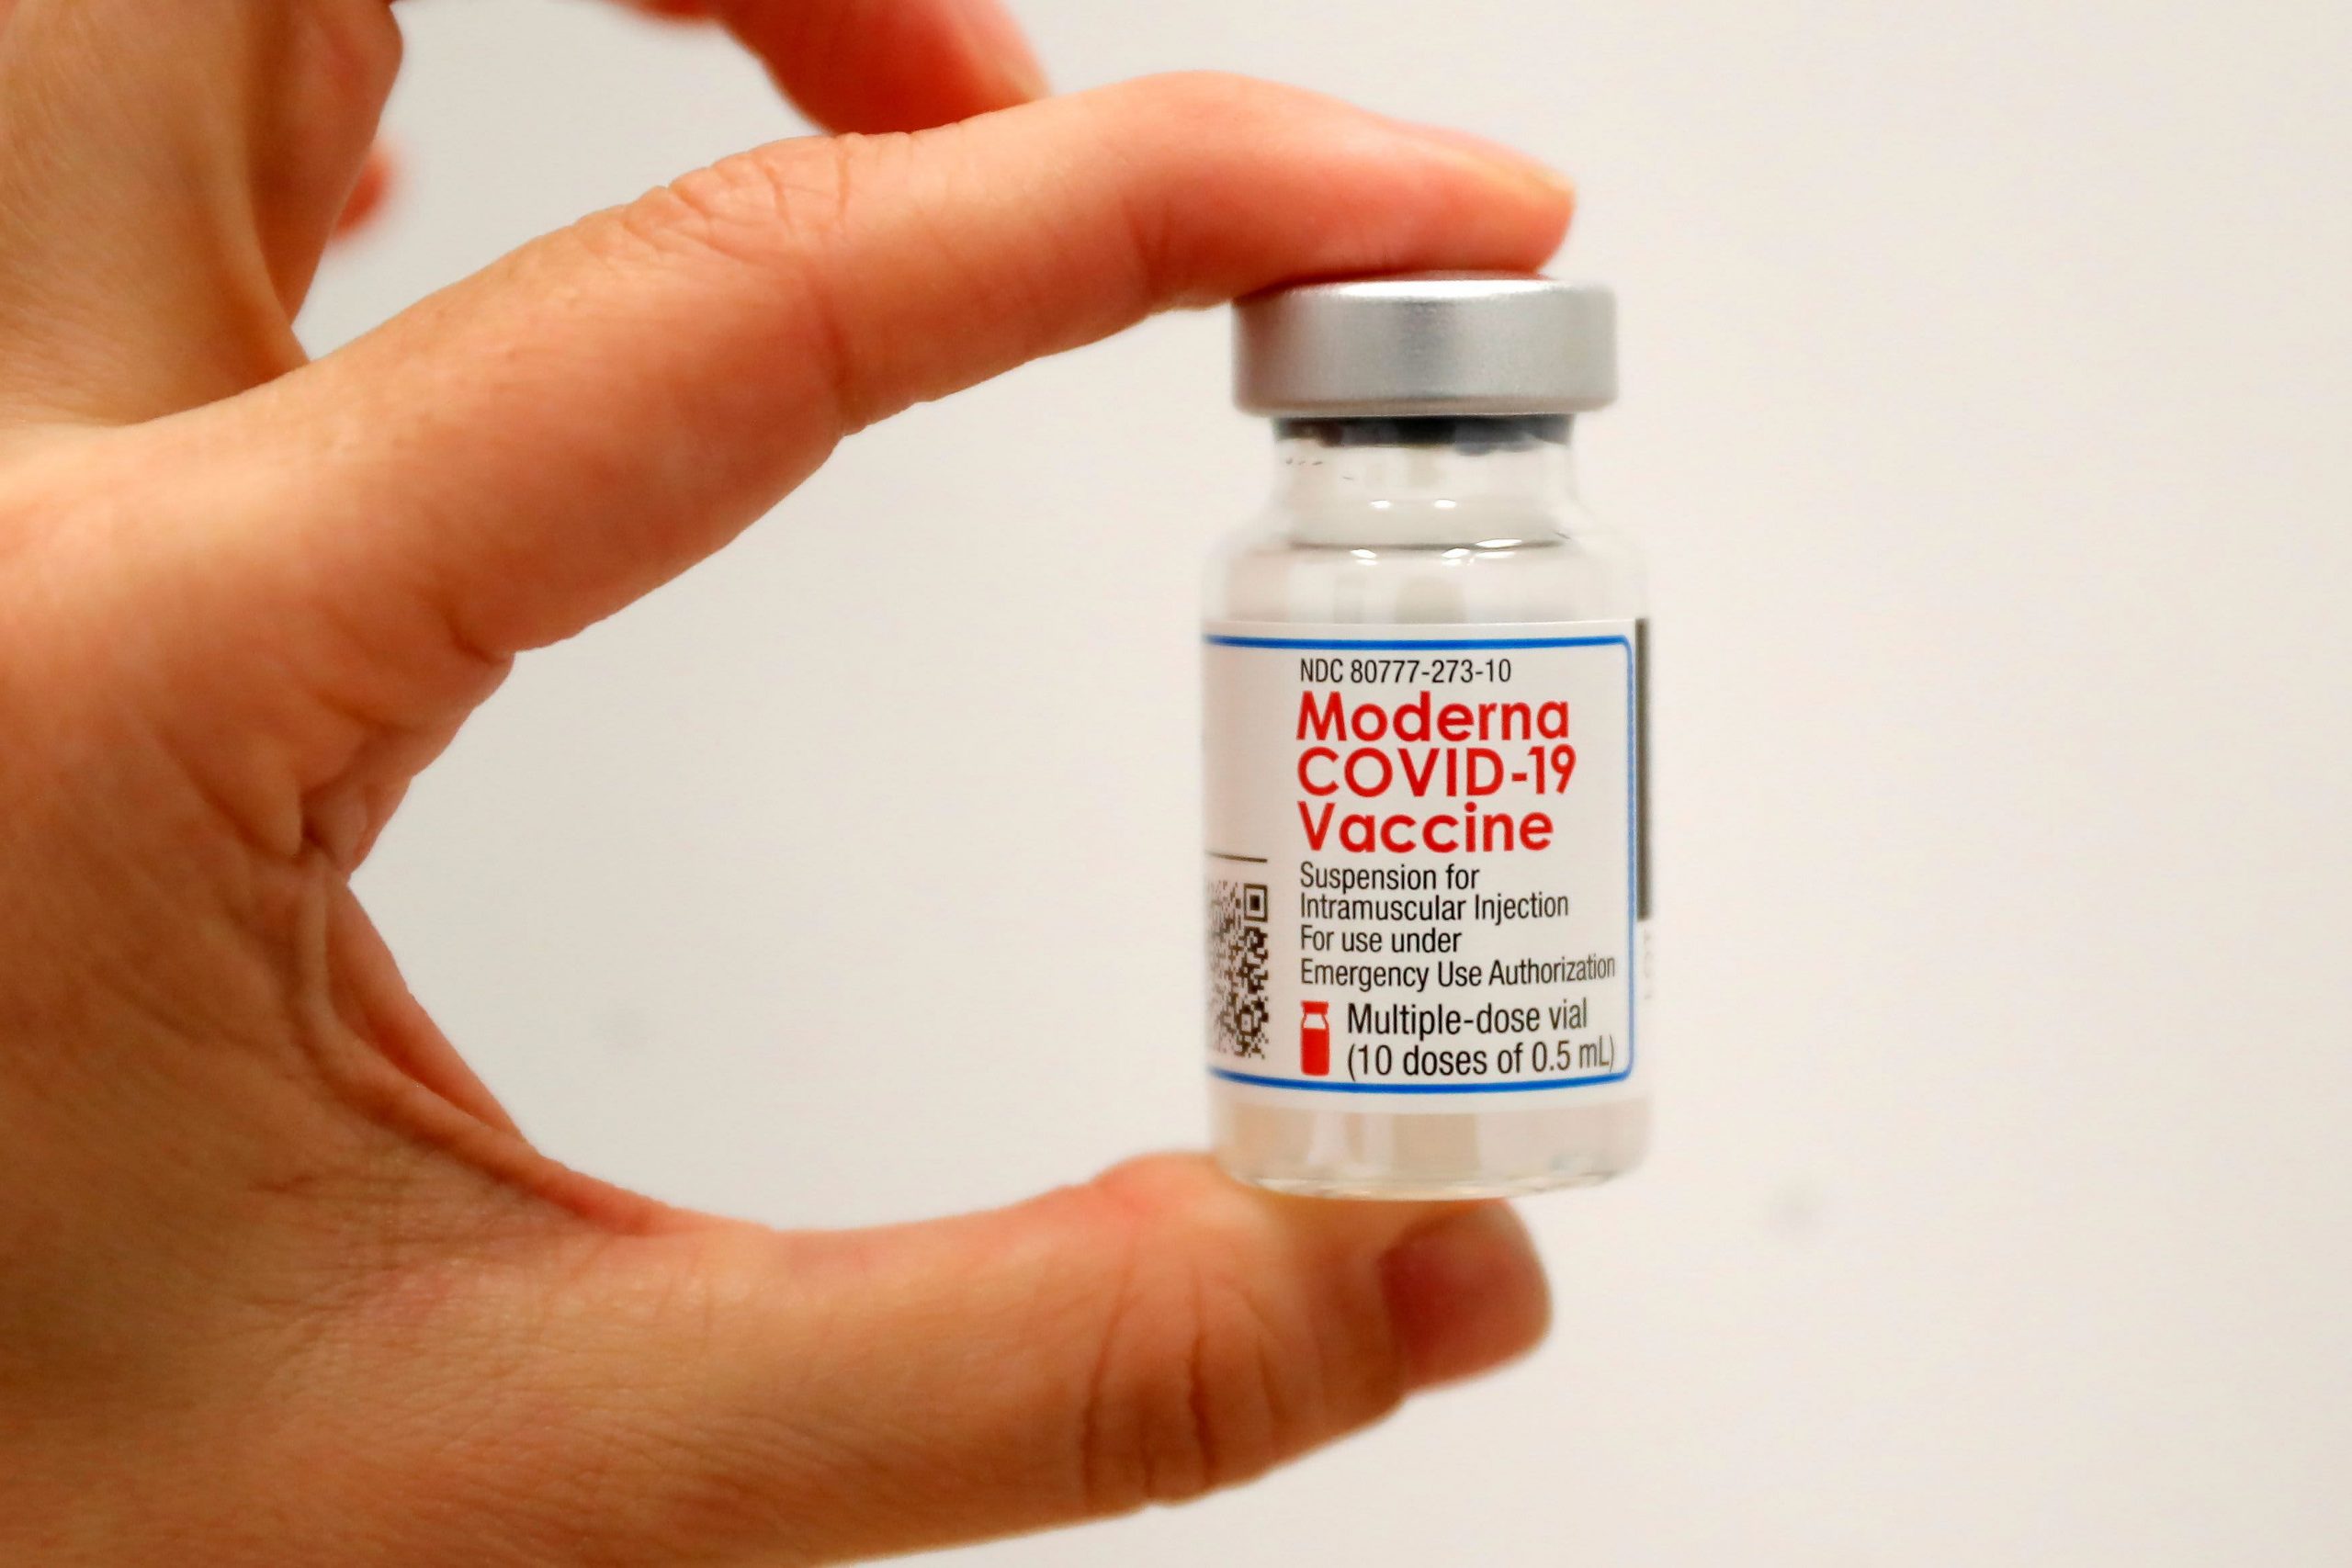 Moderna asks FDA to authorize 5 additional doses per Covid vaccine vial to speed distribution, source tells CNBC